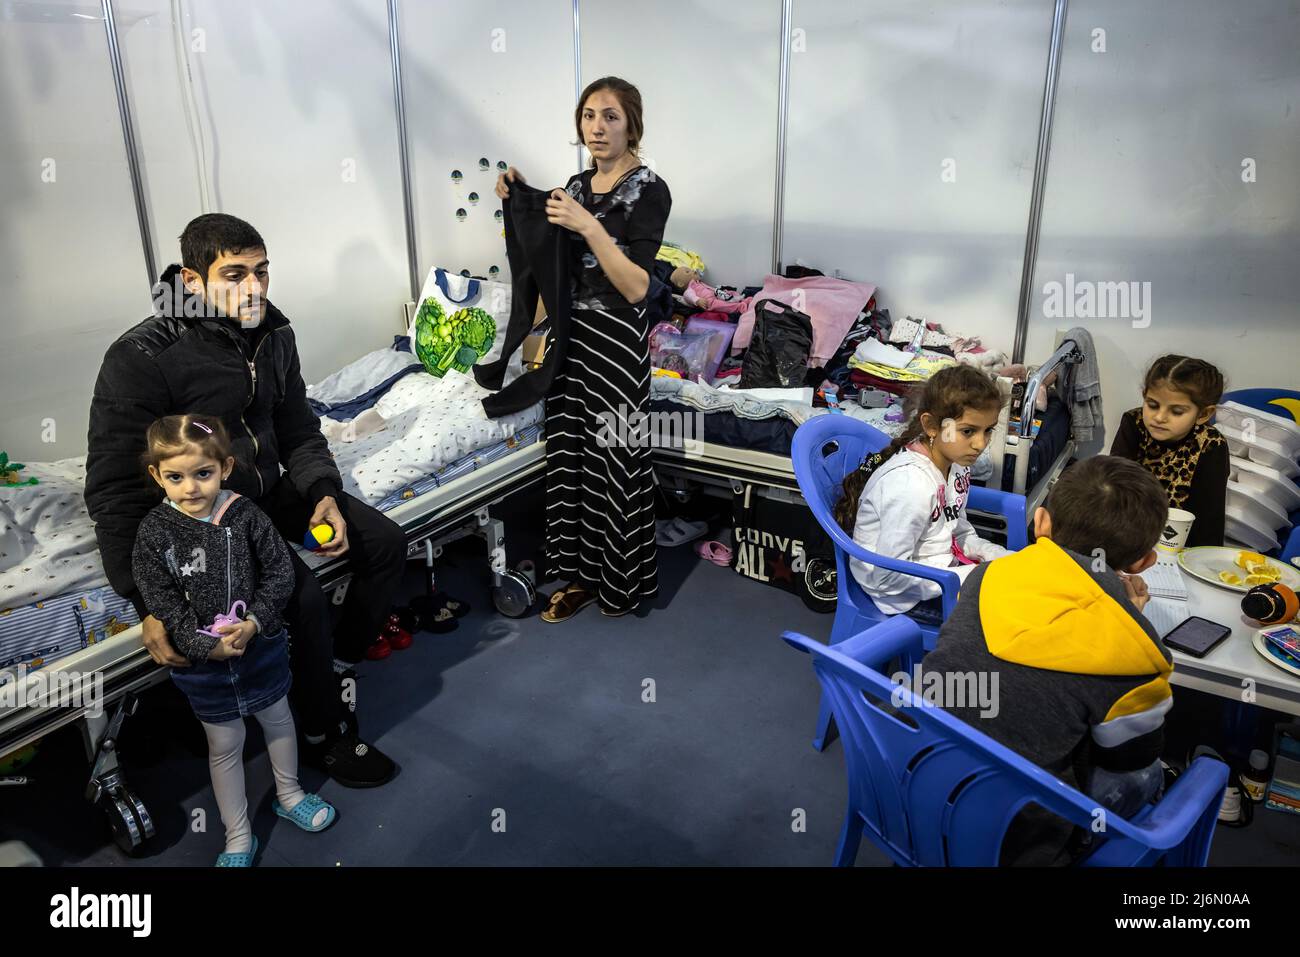 Refugee family of Arthur Dana from Nikolayev Ukraine living in the refugee camp at Moldexpo Exhibition Centre, Chisinau, Moldova after their escape. Stock Photo